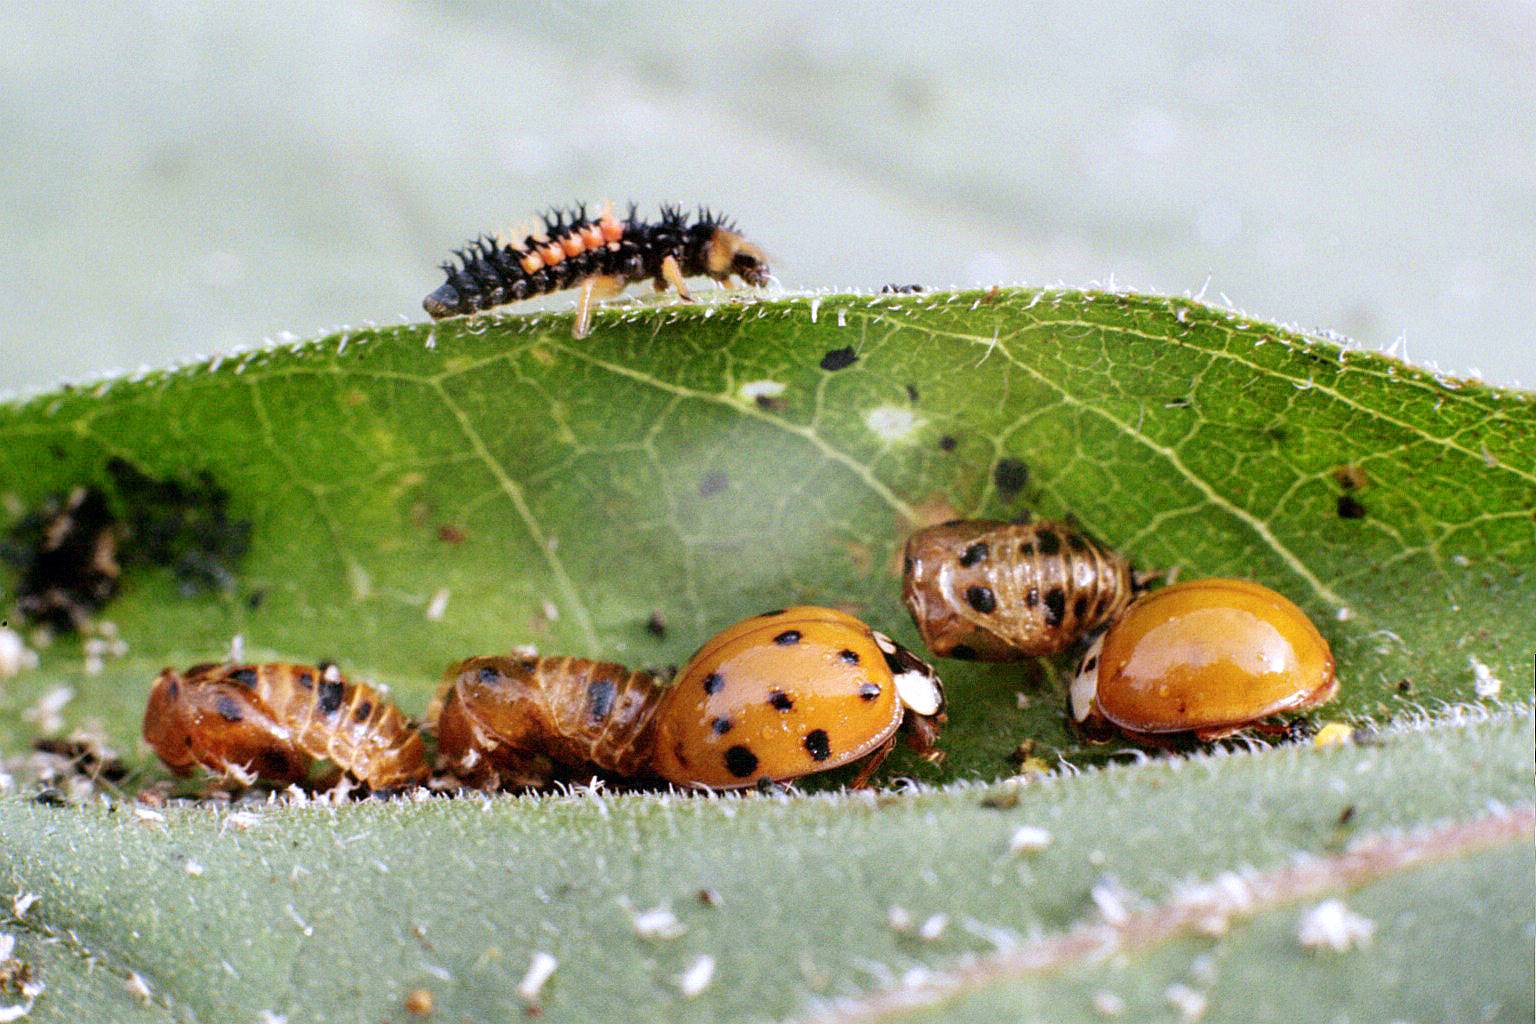 larva, pupa cases and adults